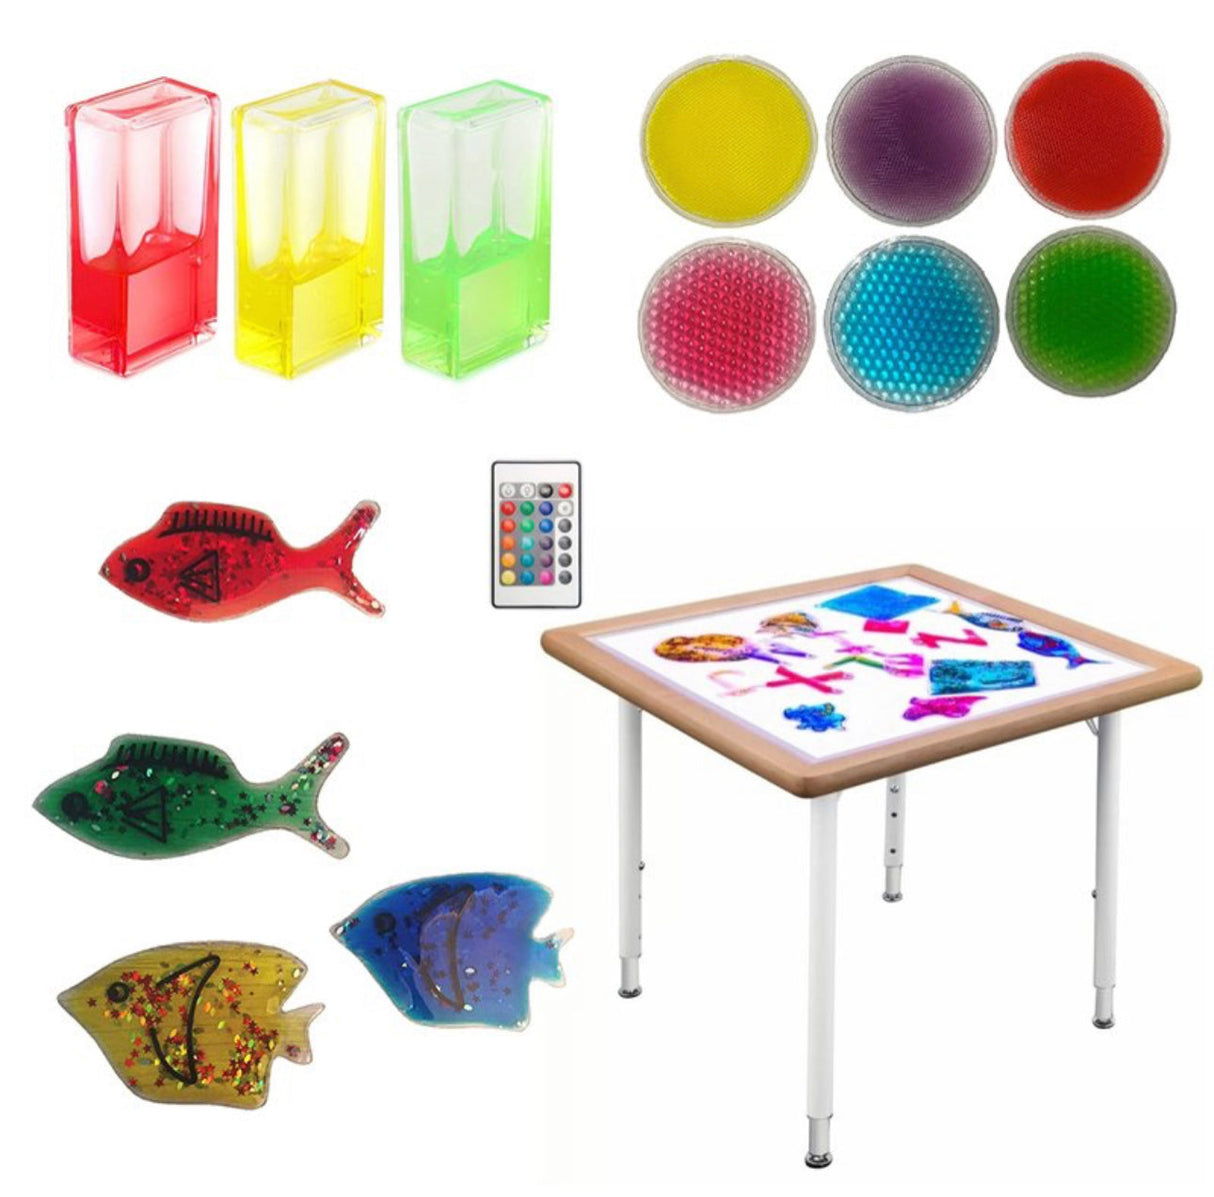 Light Up LED Desk Table For Drawing & 13 Toys for illumination Incl. Remote